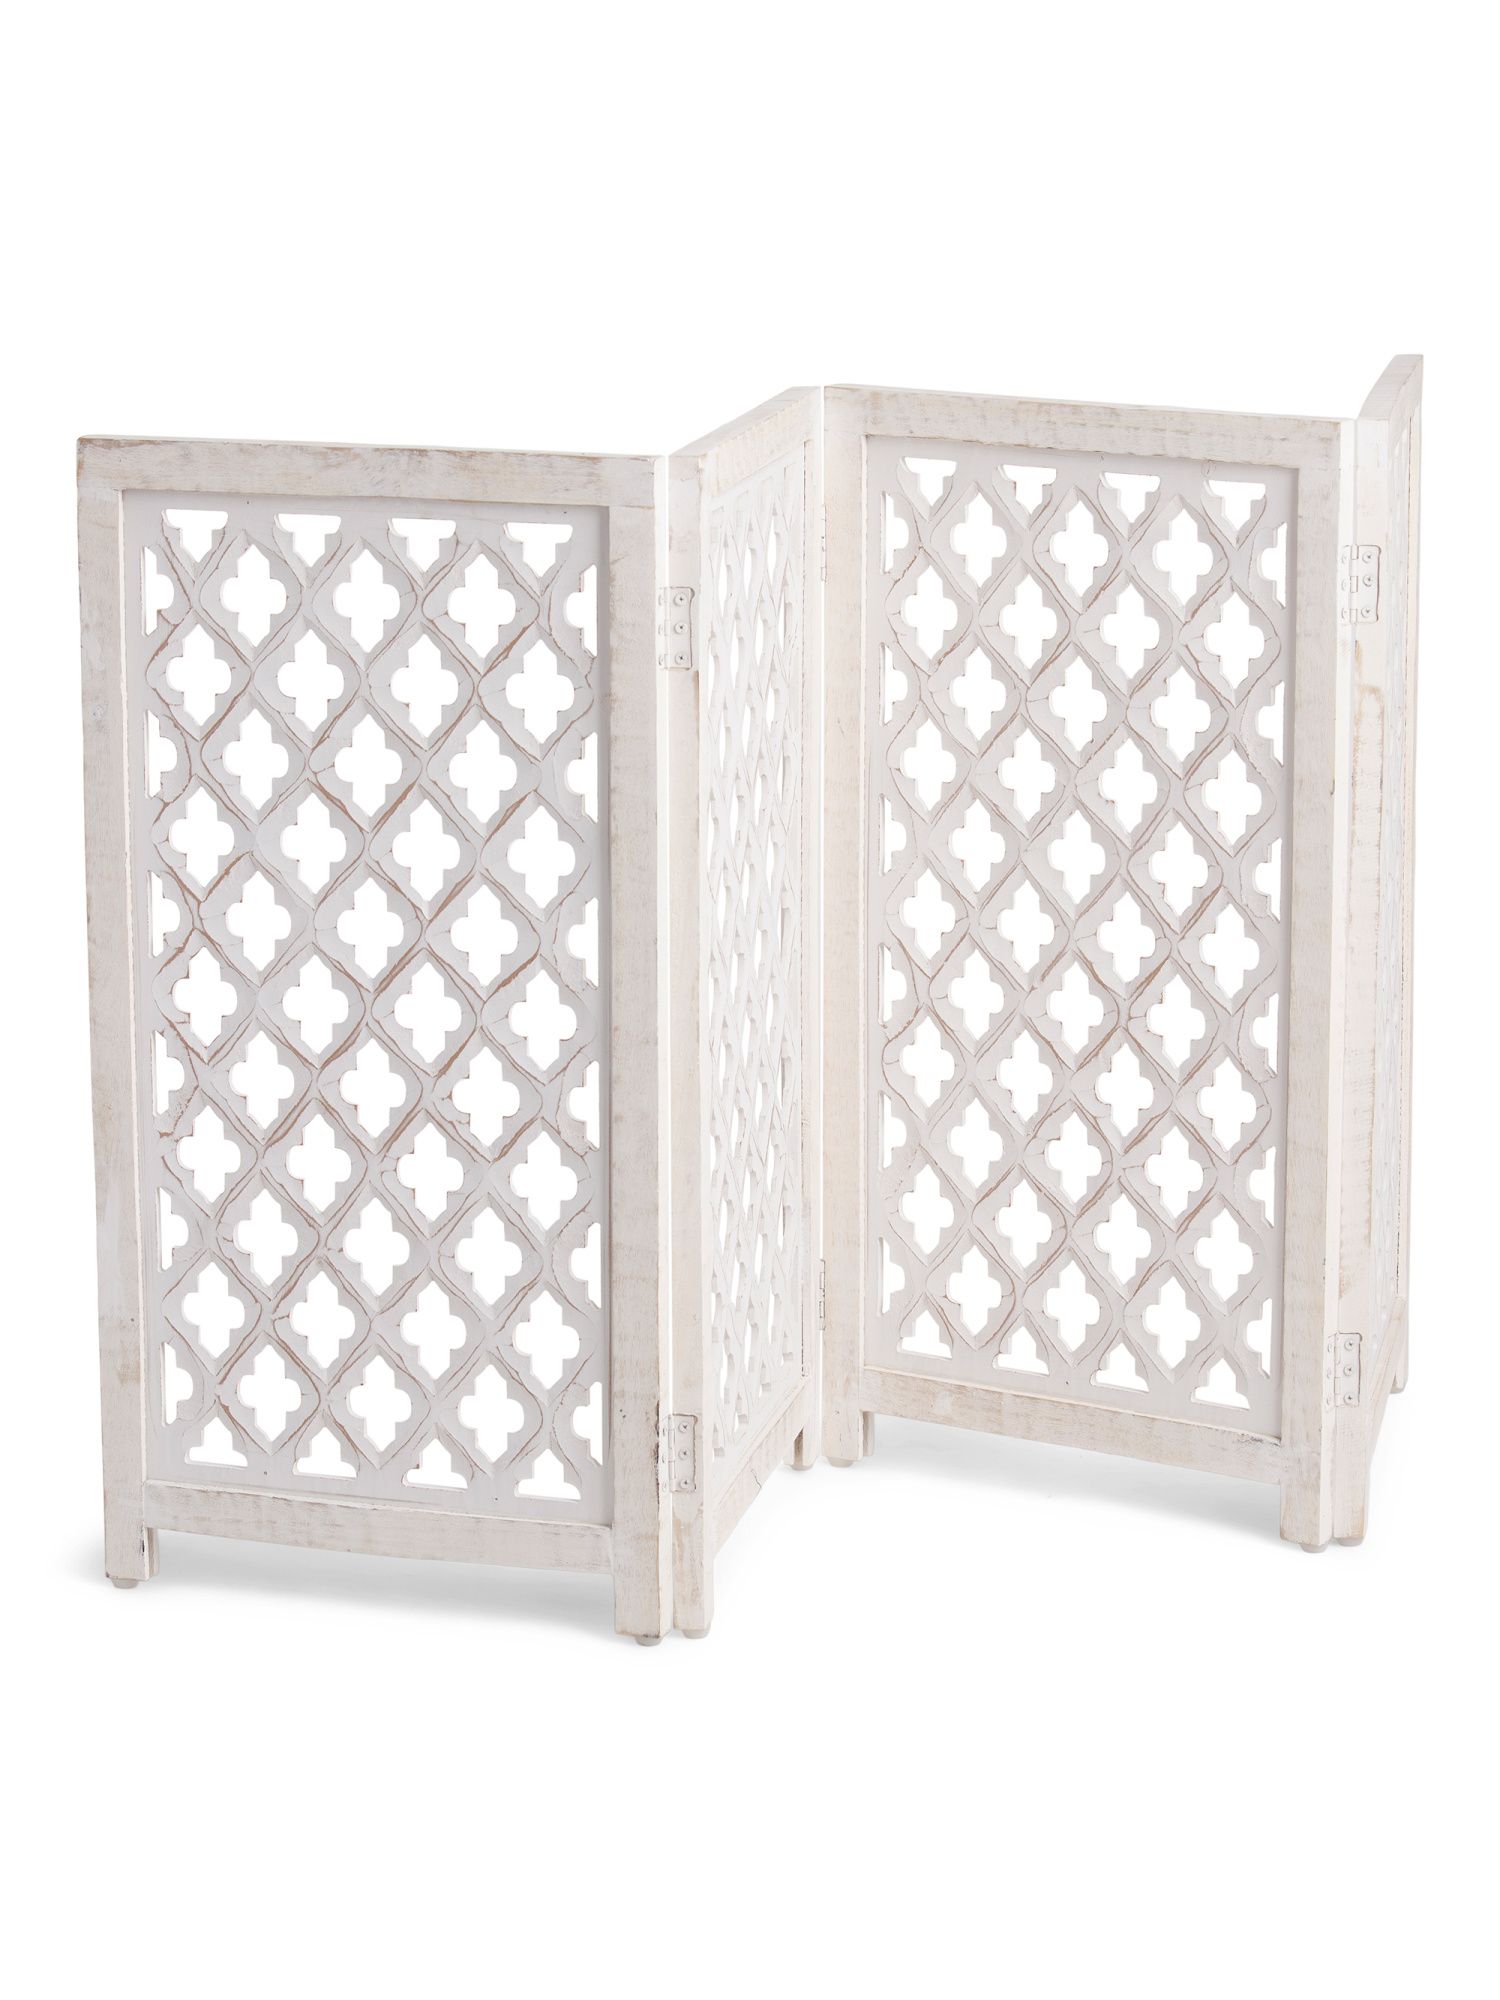 69x33 Carved White Wash Wooden Pet Gate | TJ Maxx